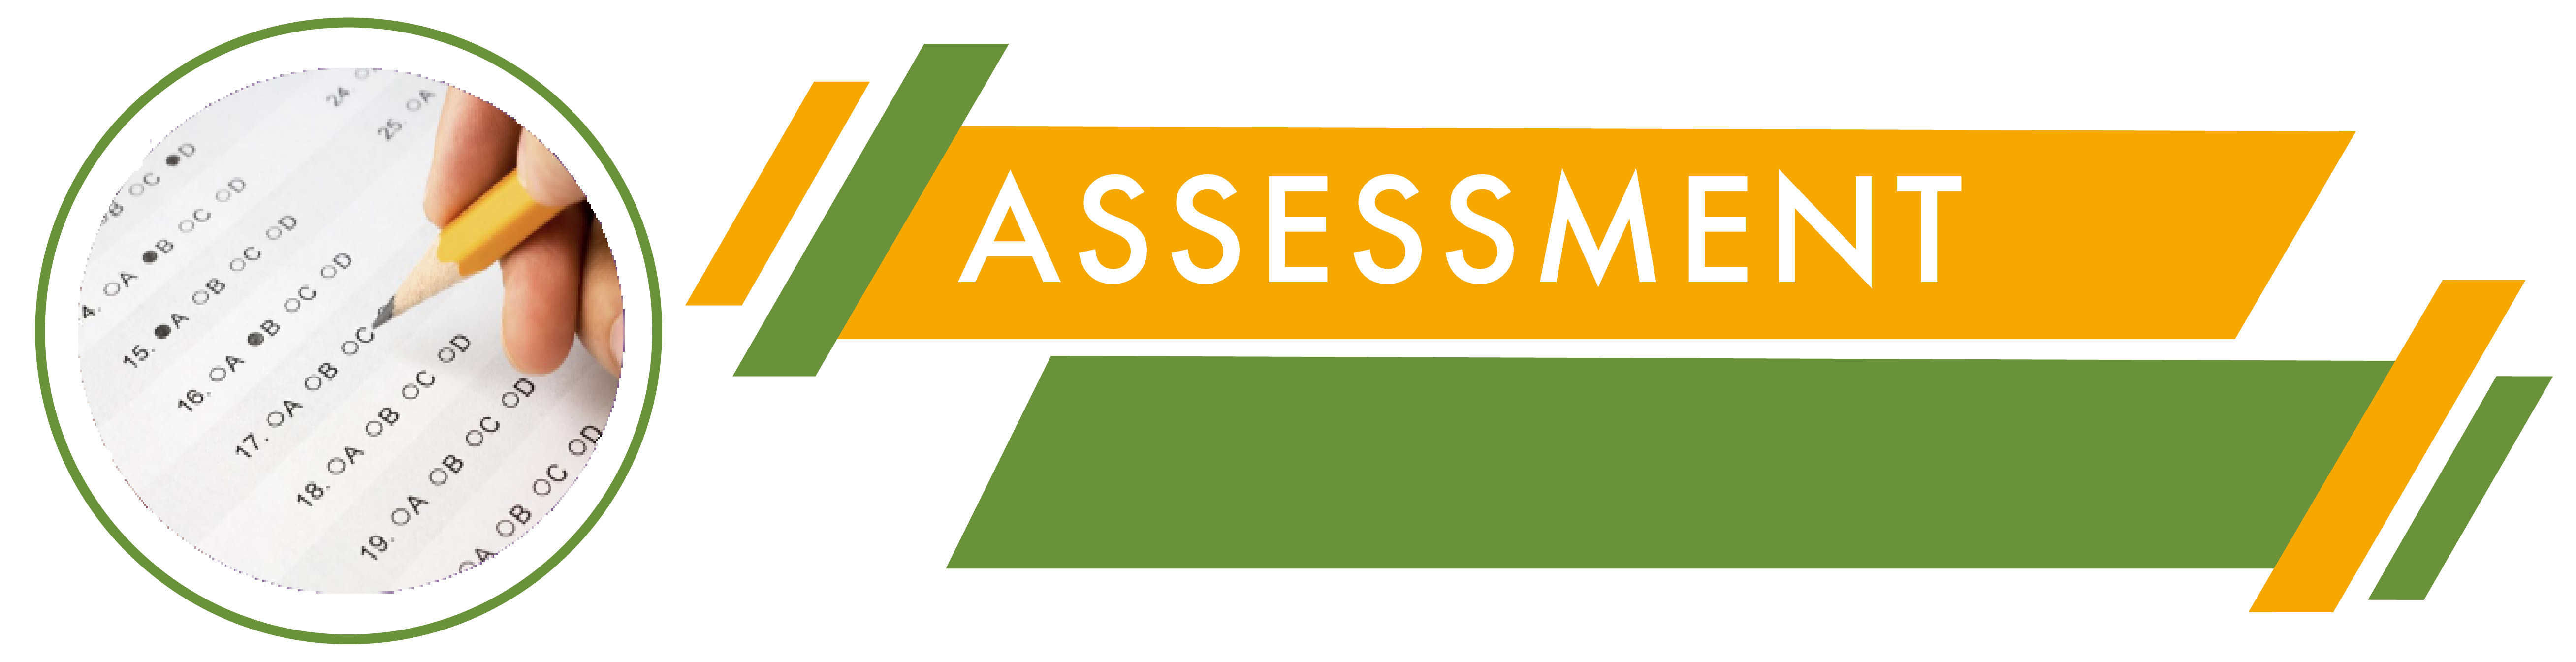 Welcome to Assessment Banner